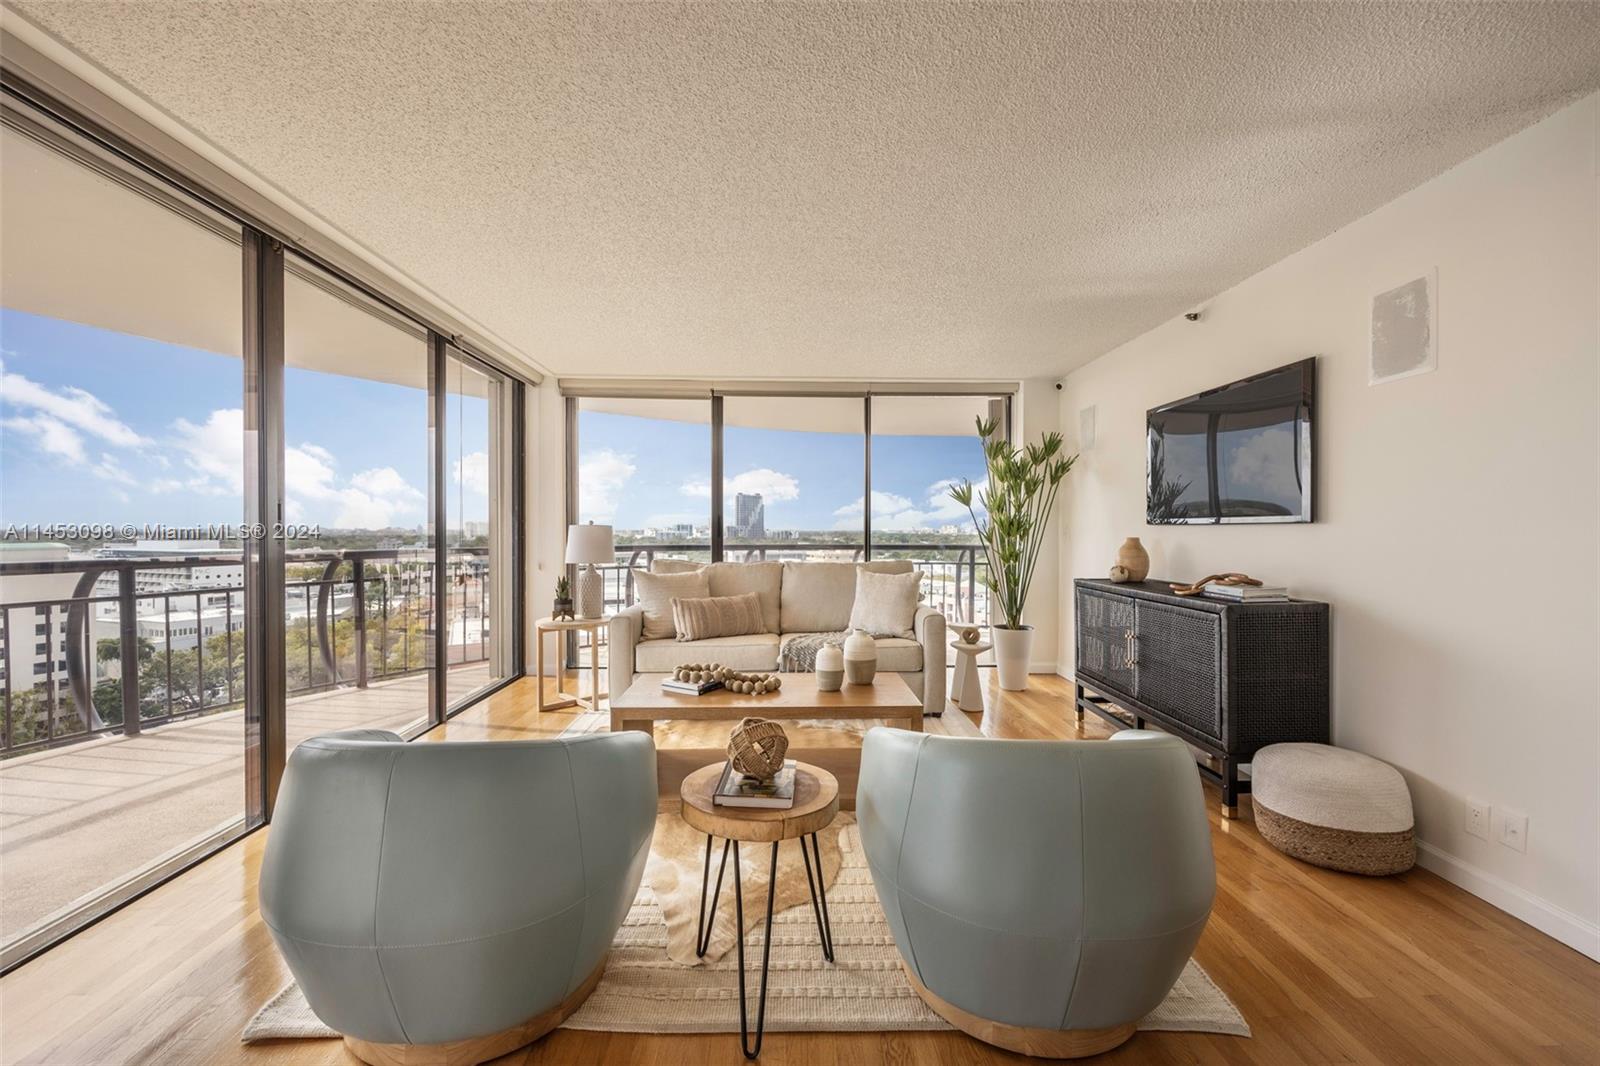 Enjoy panoramic city and bay views from this high-floor residence in Grove Towers. Located just steps from the Grove village’s galleries, boutiques, cafes and bayfront parks & marinas. Spacious, light-filled unit with floor-to-ceiling windows that open to a large wrap-around balcony from living, dining & both bedrooms. Opportunity to update the original kitchen & baths to your custom specifications. Separate (in unit) laundry room. The building’s 40 year recertification has been completed. Grove Towers is exceptionally well-managed & serviced by experienced, long-term staff. Enjoy recently renovated amenities- including fitness center, pool & tennis courts. Just minutes to downtown, MIA, Coral Gables, Key Biscayne & the Beaches.